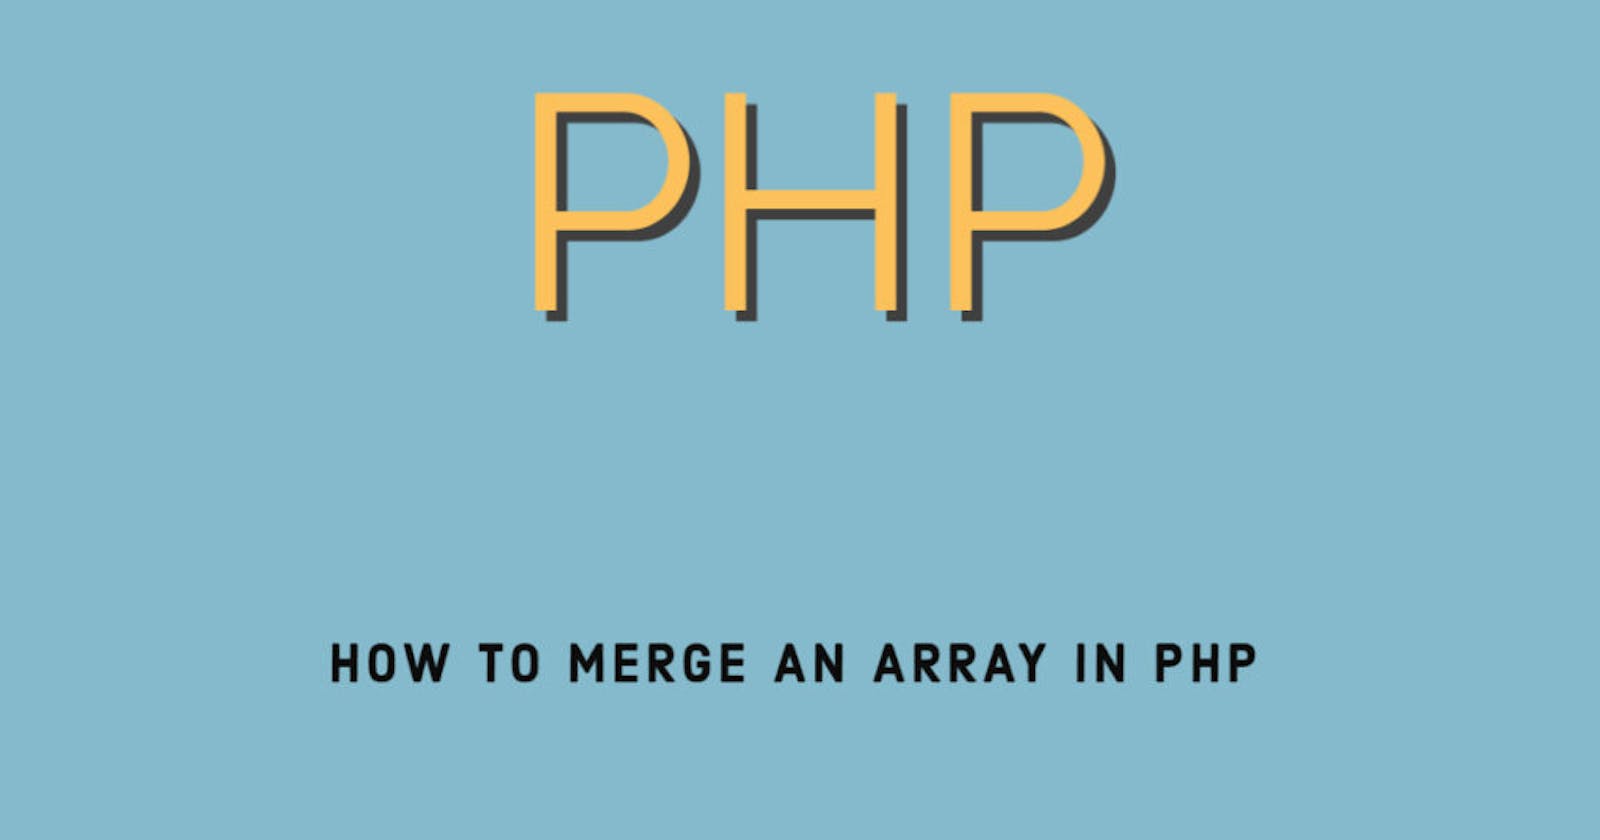 How to merge an array in PHP?